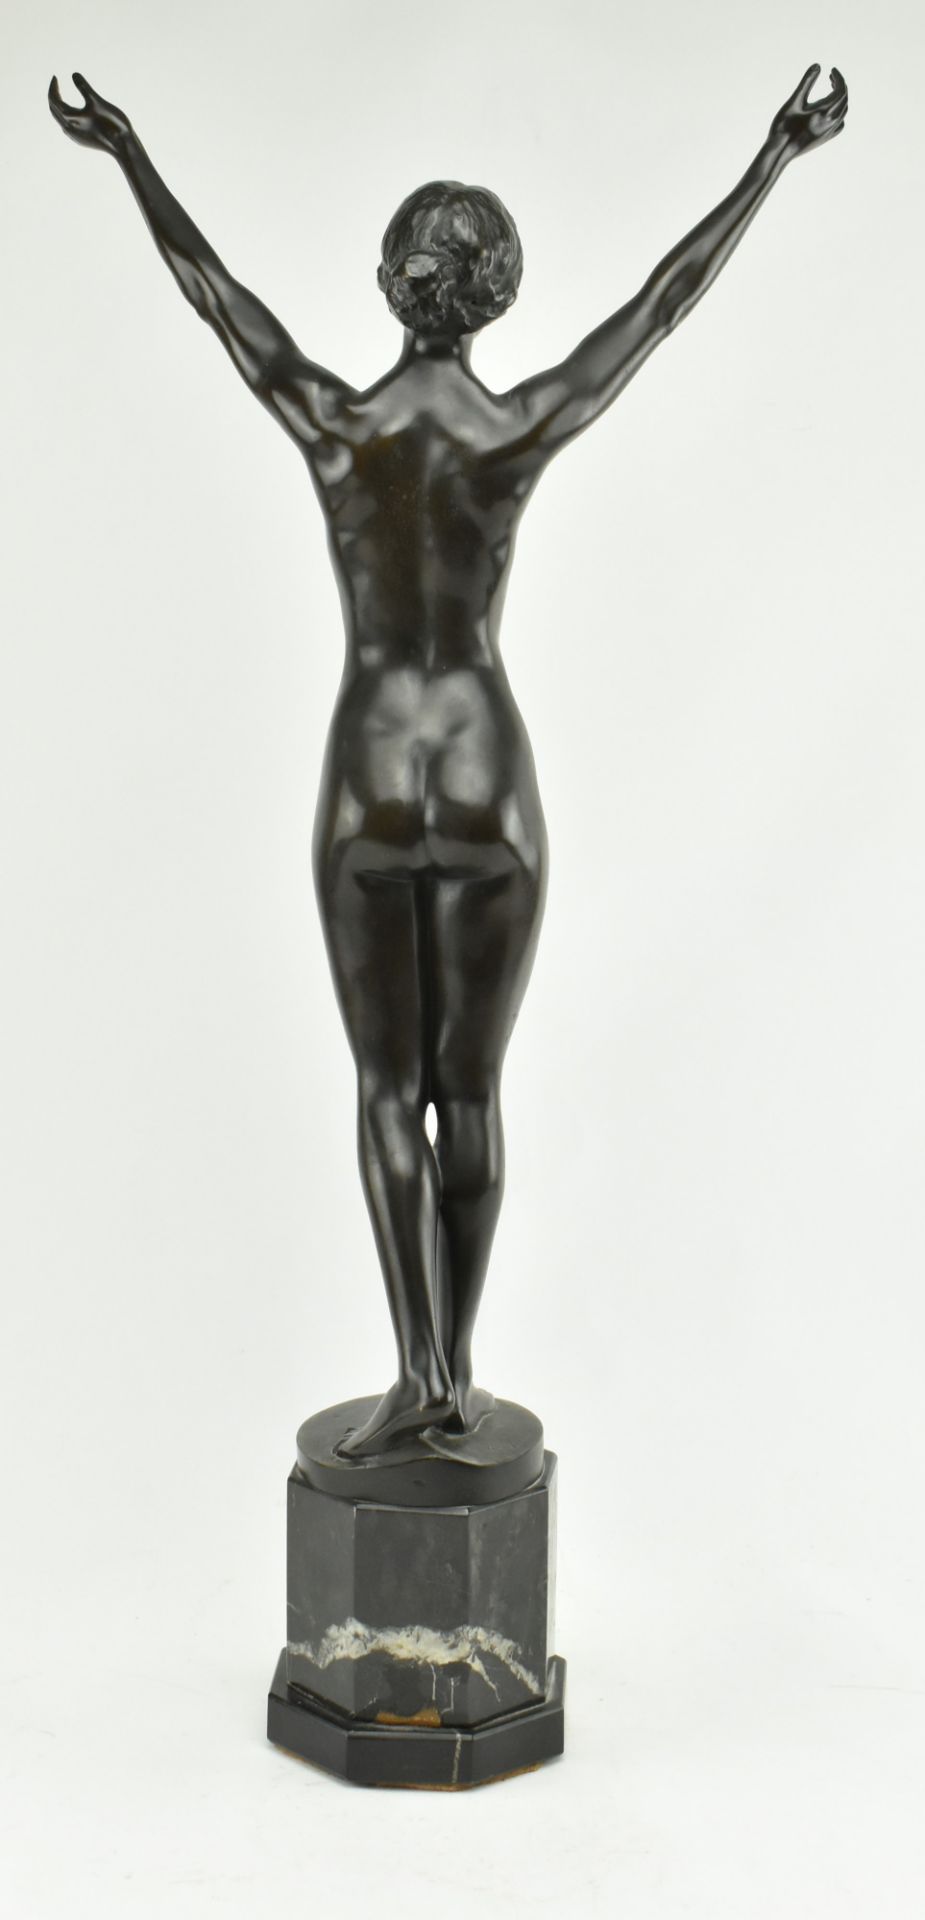 AFTER PAUL AICHELE (1859-1920) - BRONZE SCULPTURE OF LADY - Image 4 of 7